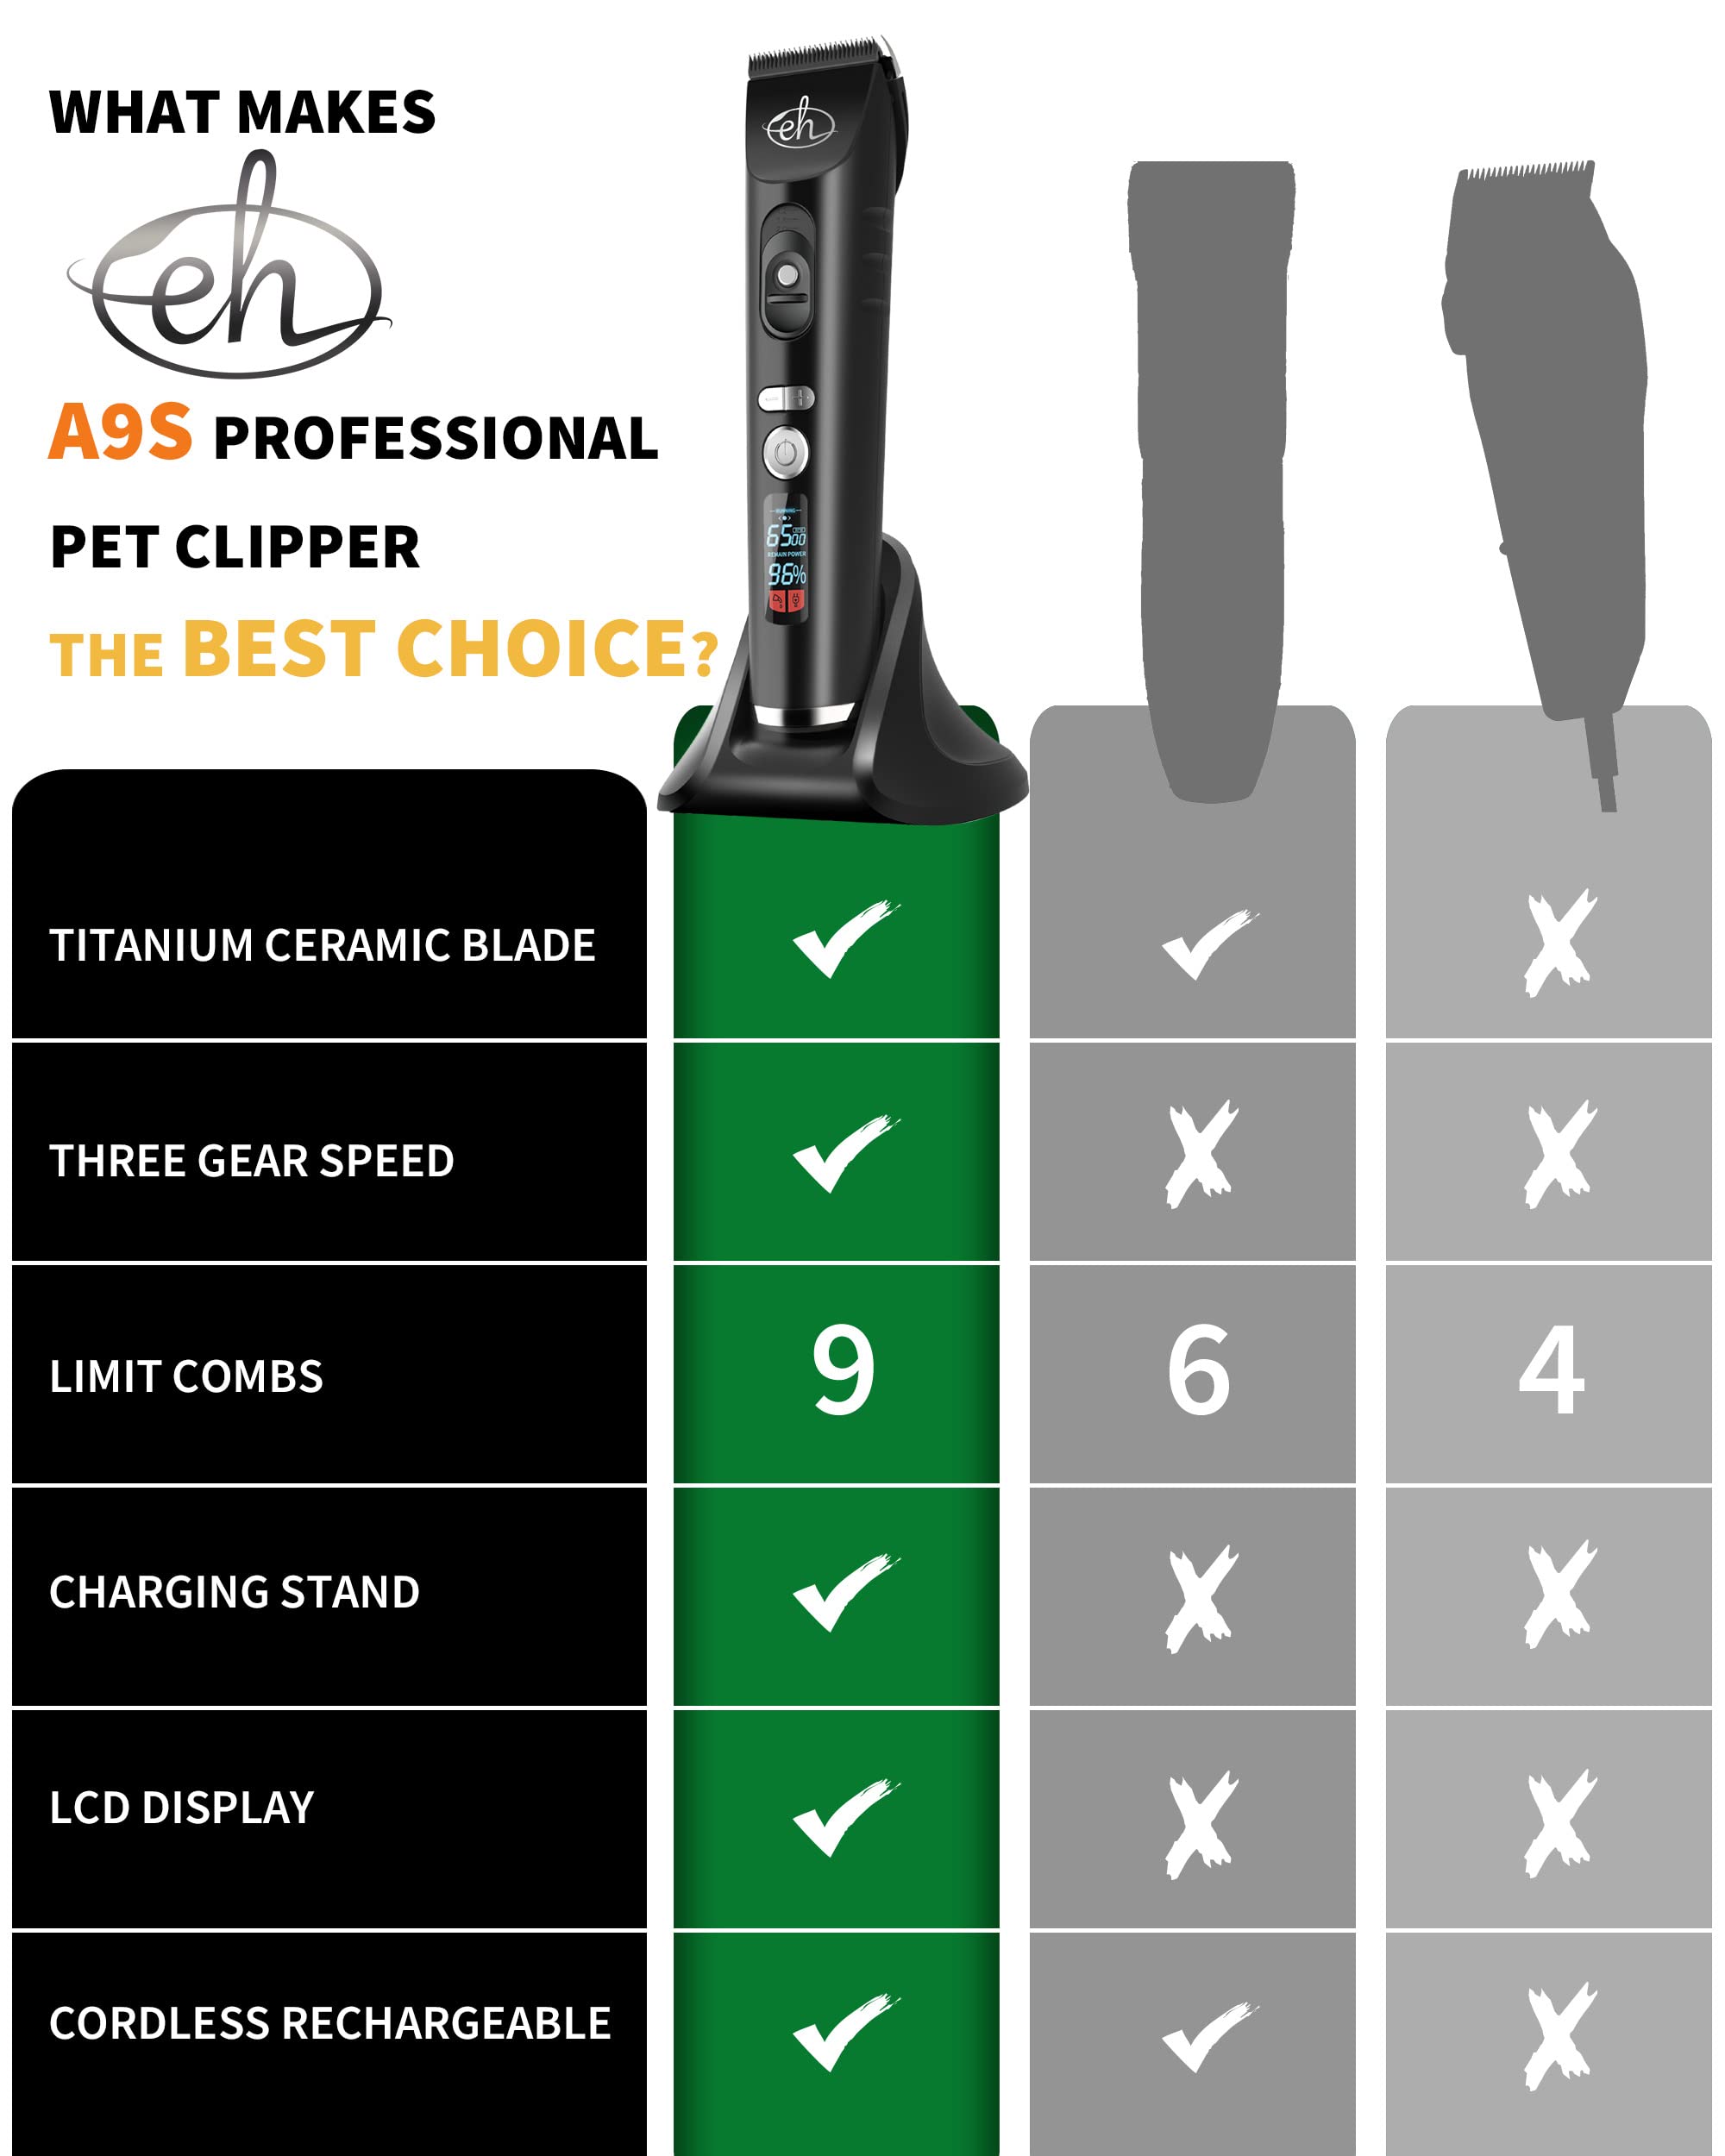 Ceramic Cat Grooming Kit Clippers Trimmer for Matted Hair - Low Noise, 3 Speed, Cordless Dogs Cats Pets Clipper Shavers Rechargeable - Professional Groomer Clipper with Charging Stand for Pet